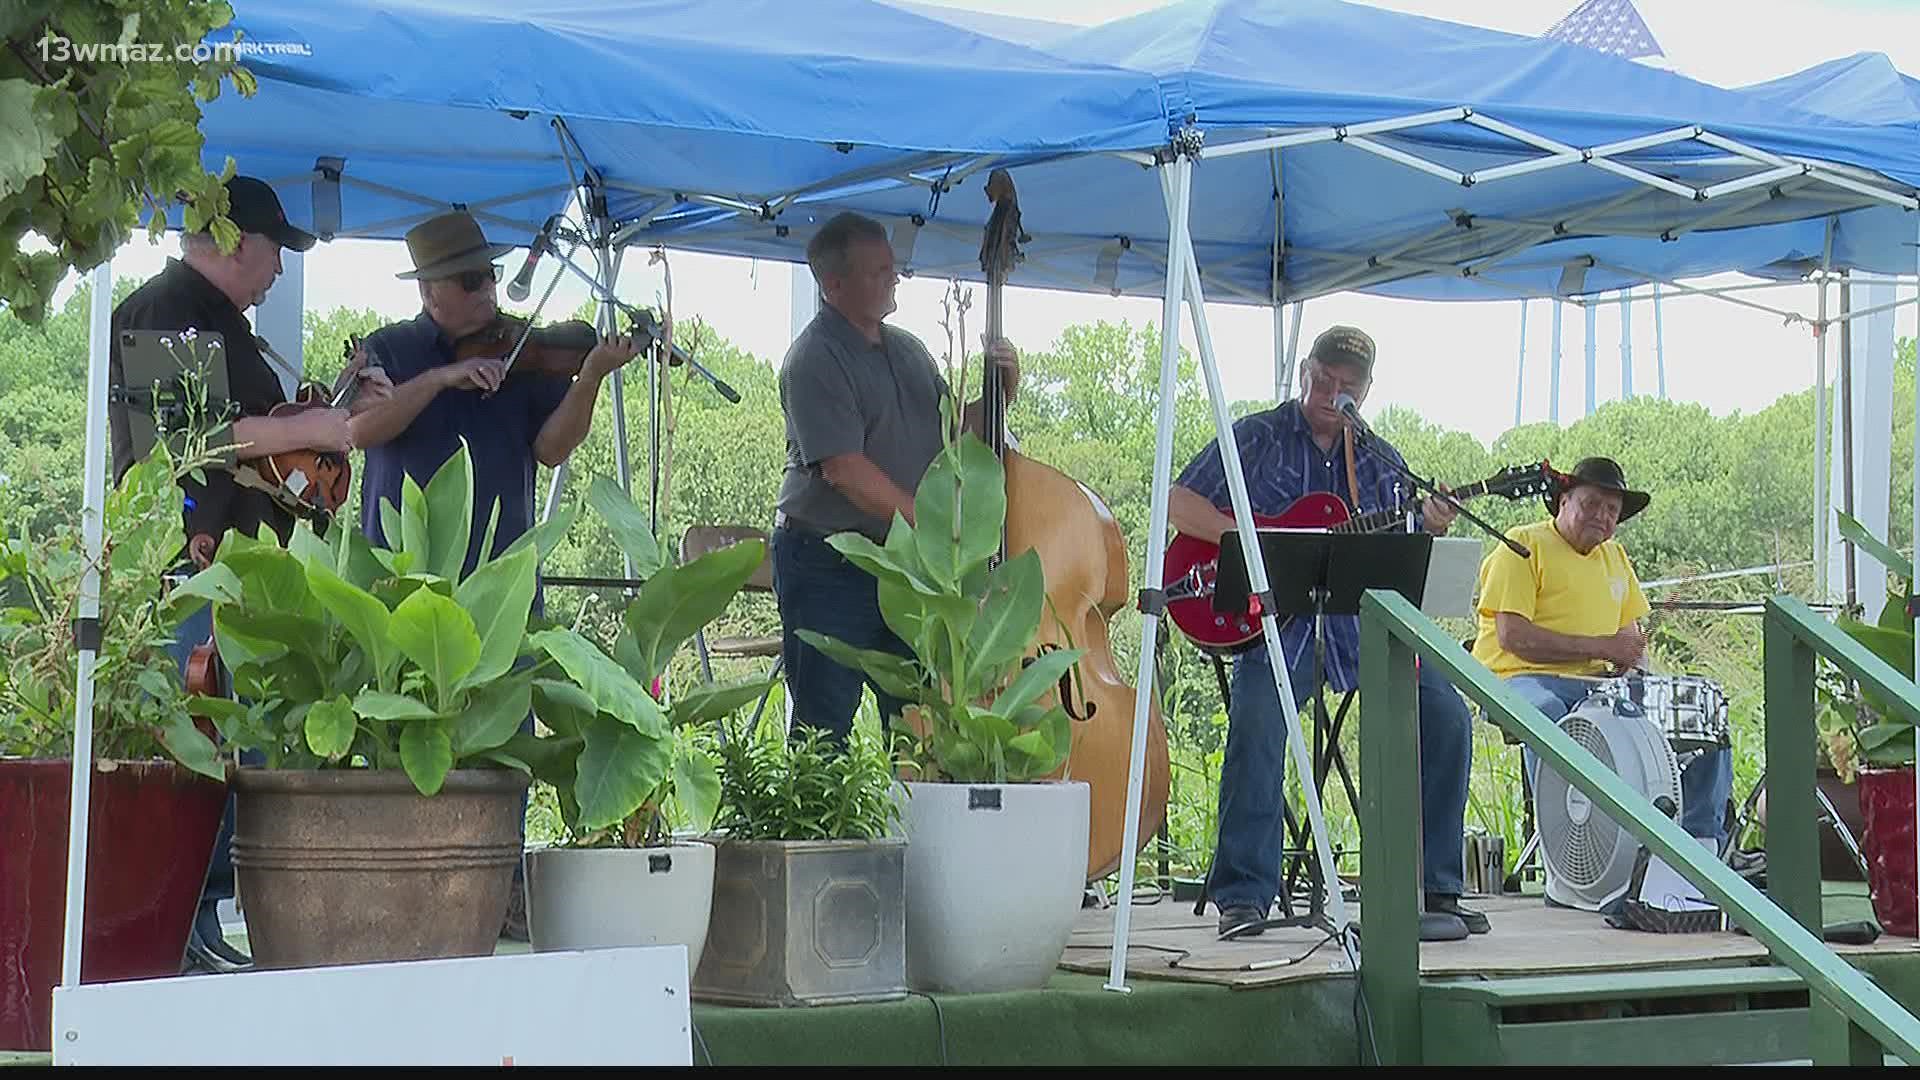 Every Sunday afternoon, musicians play their tunes from noon to 4 p.m. for free.